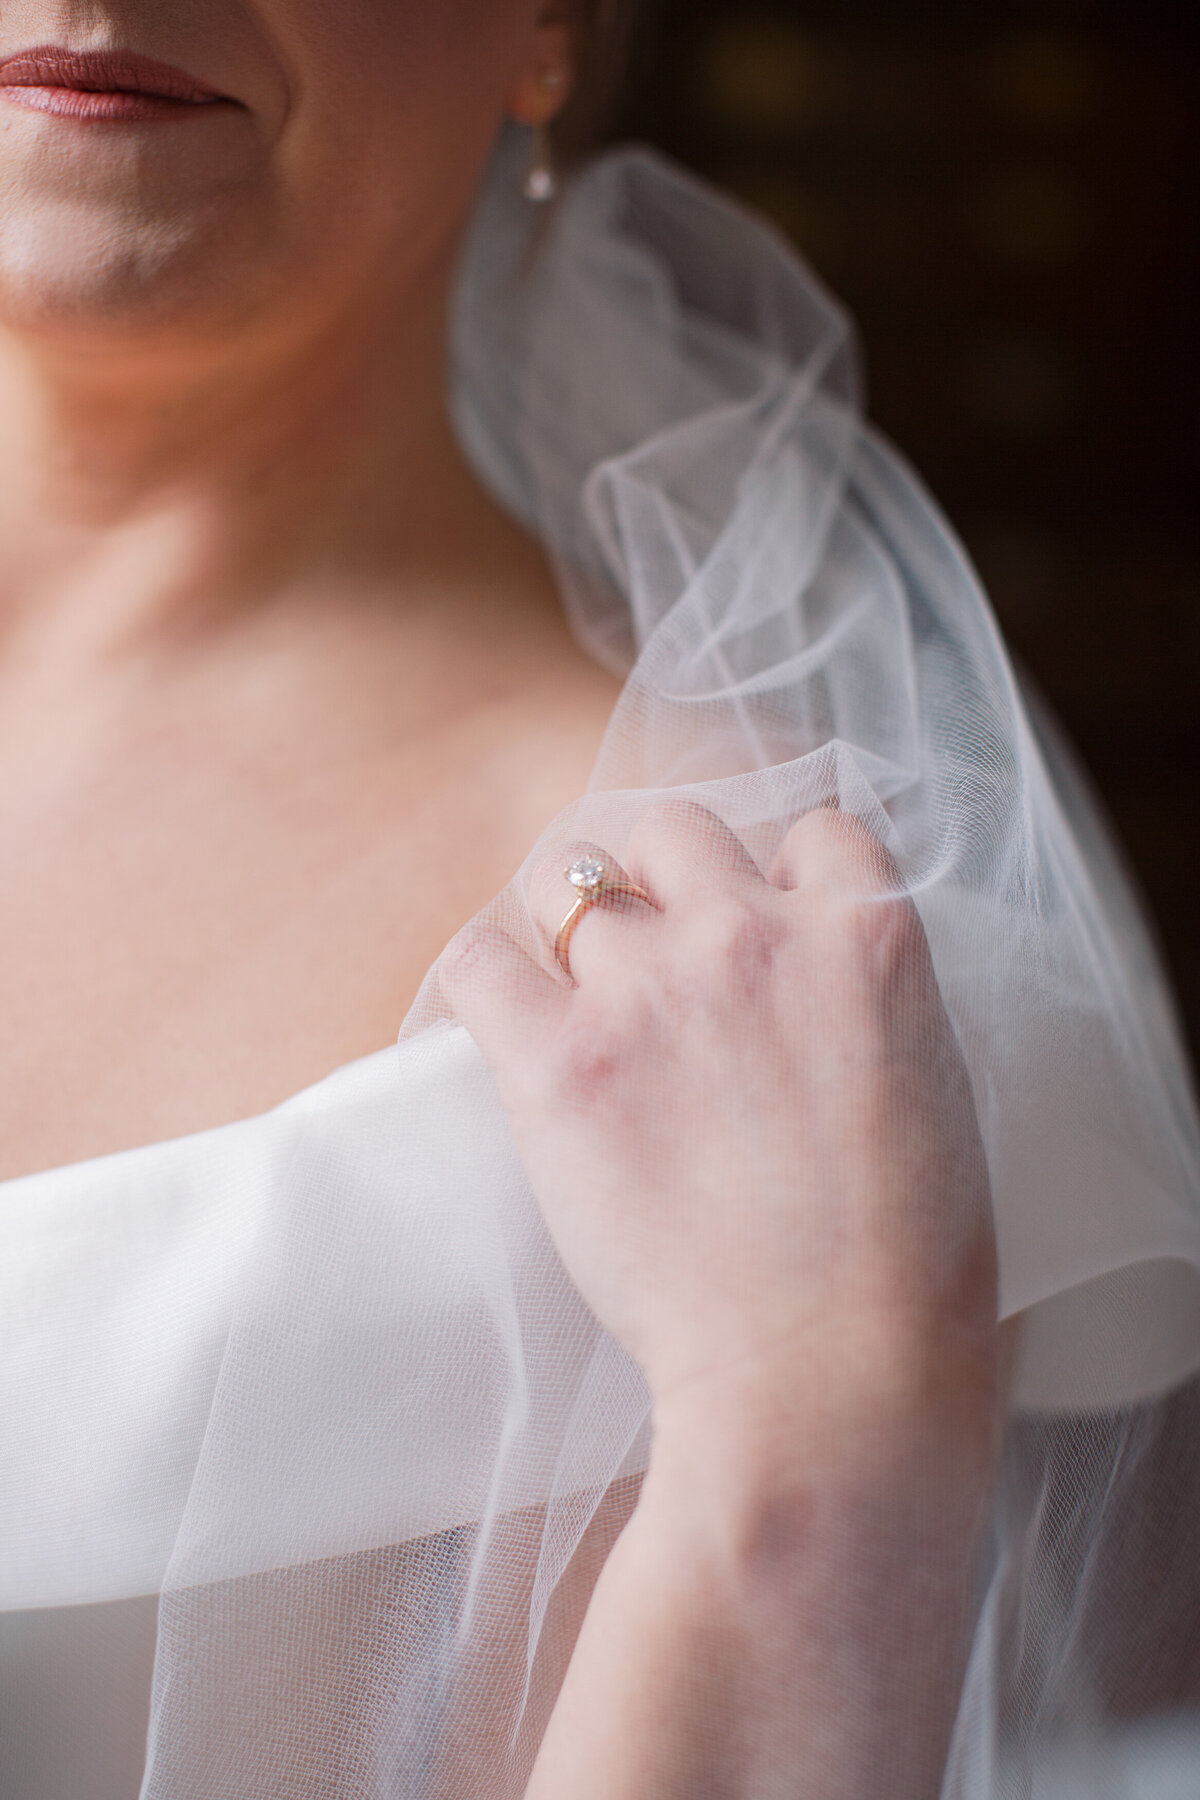 Details of bridal veil and engagement ring